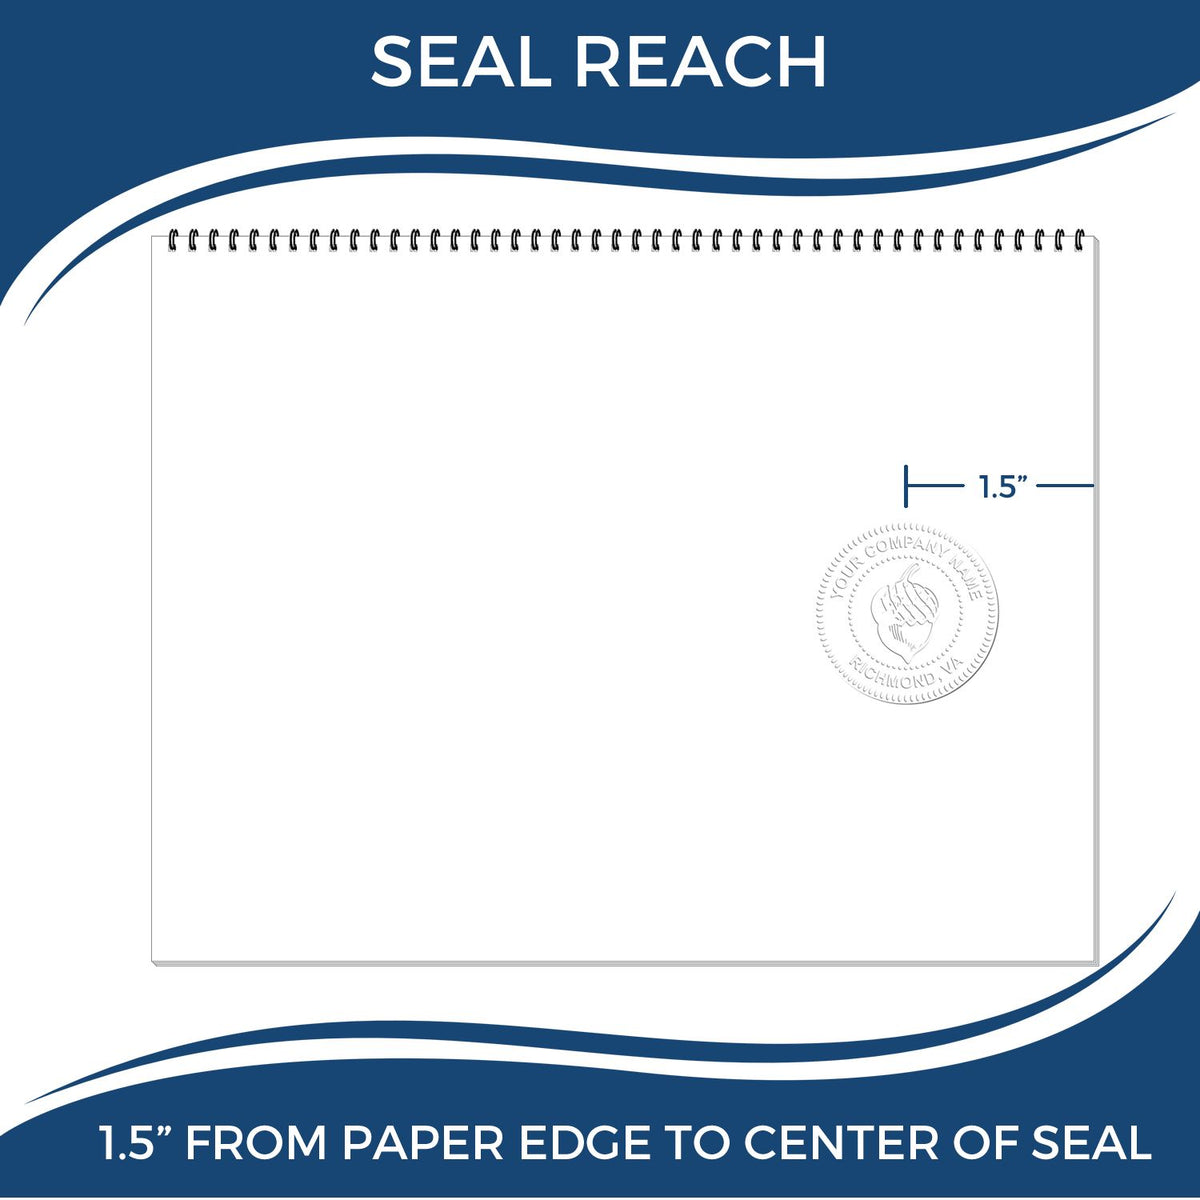 An infographic showing the seal reach which is represented by a ruler and a miniature seal image of the Minnesota Desk Surveyor Seal Embosser